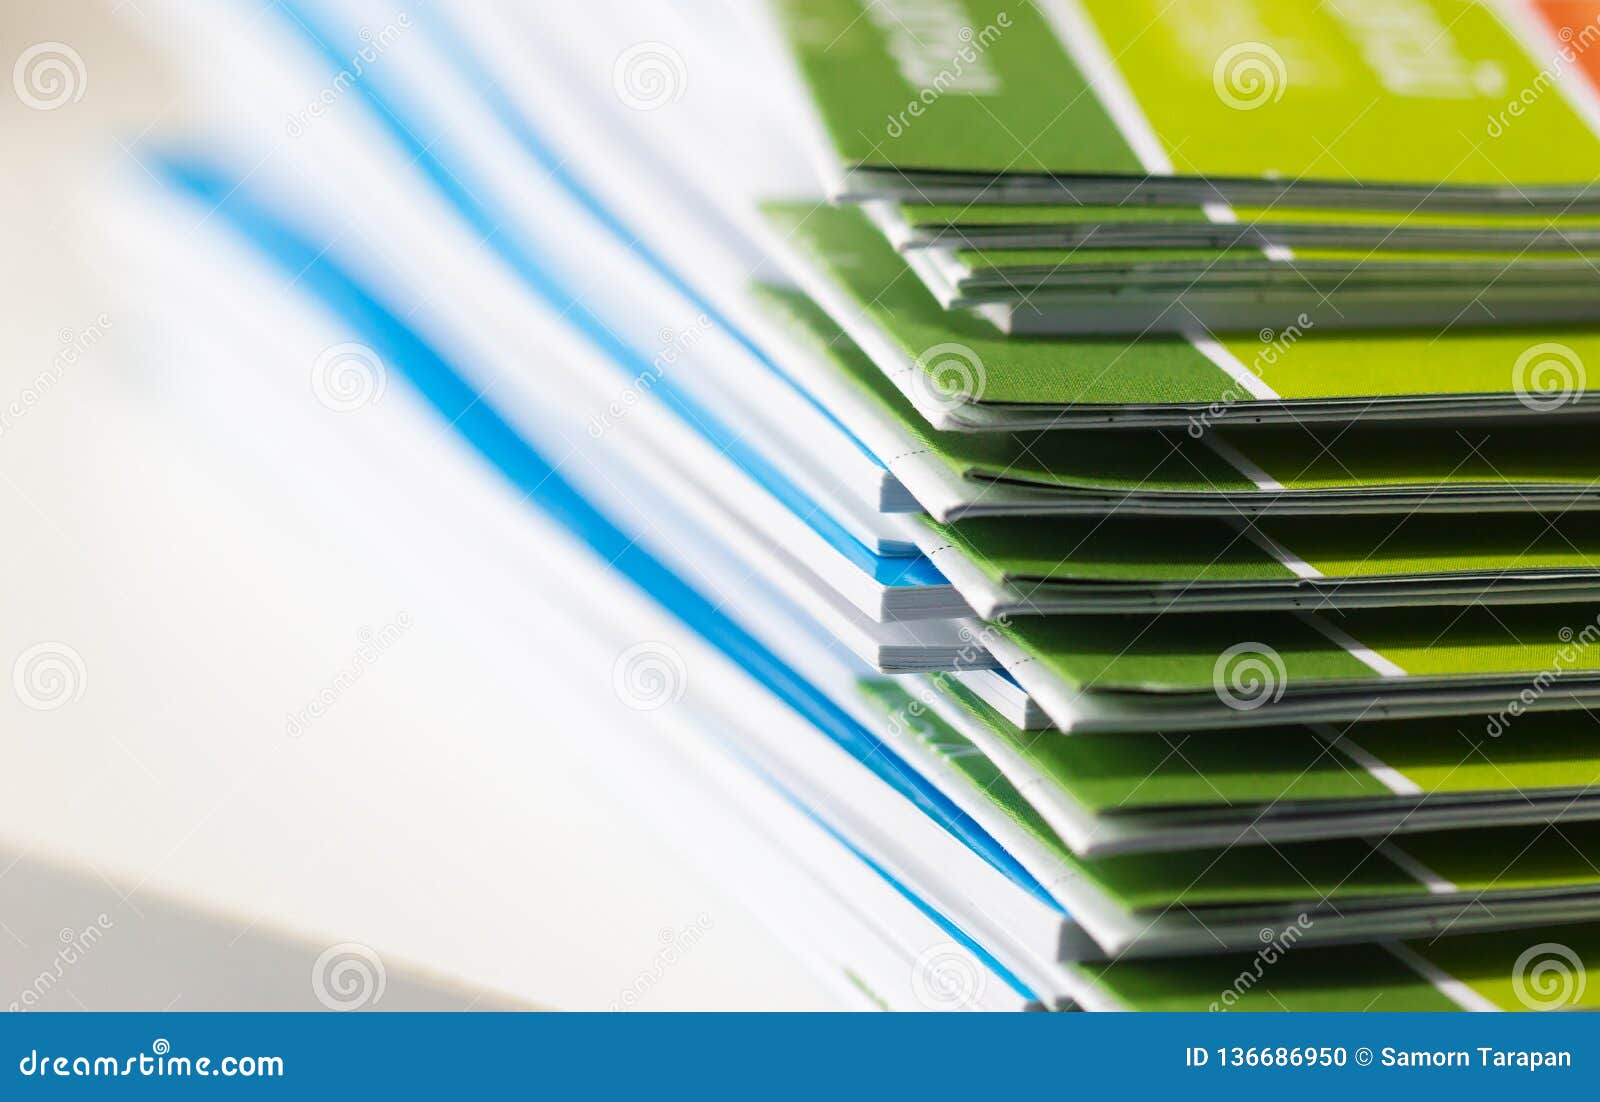 stack of report paper documents for business, business papers for annual reports files. business offices concept, soft focus